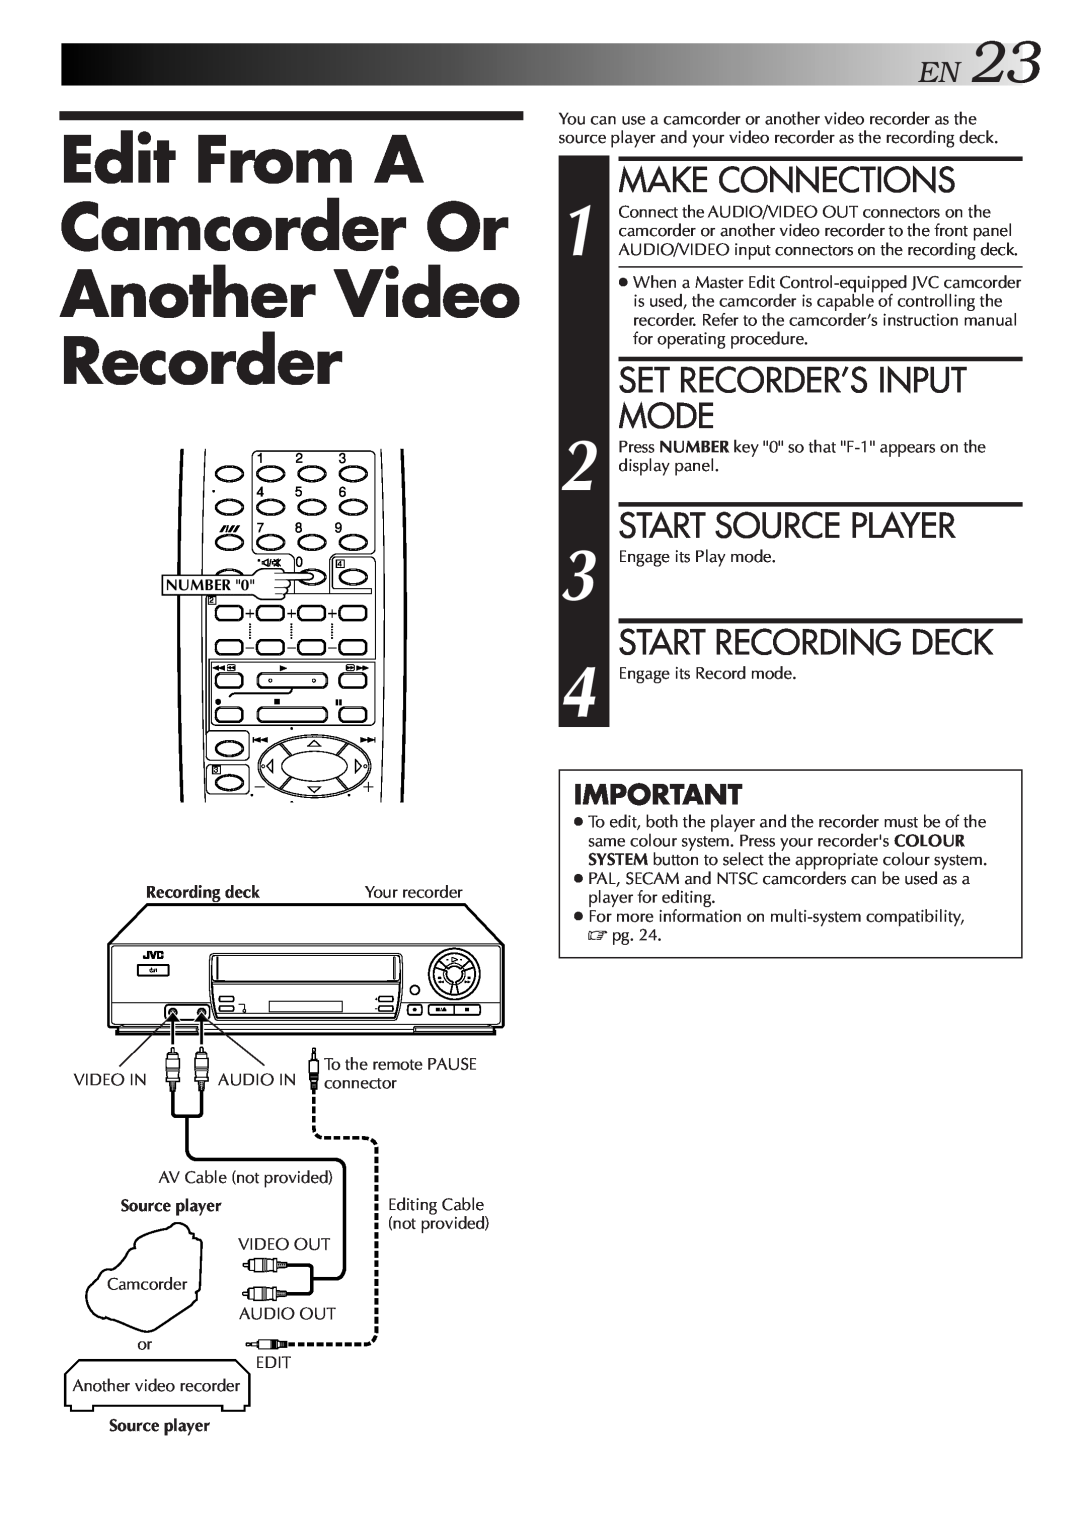 JVC HR-J457MS Edit From A Camcorder Or Another Video Recorder, EN23, Set Recorder’S Input, Mode, Make Connections 